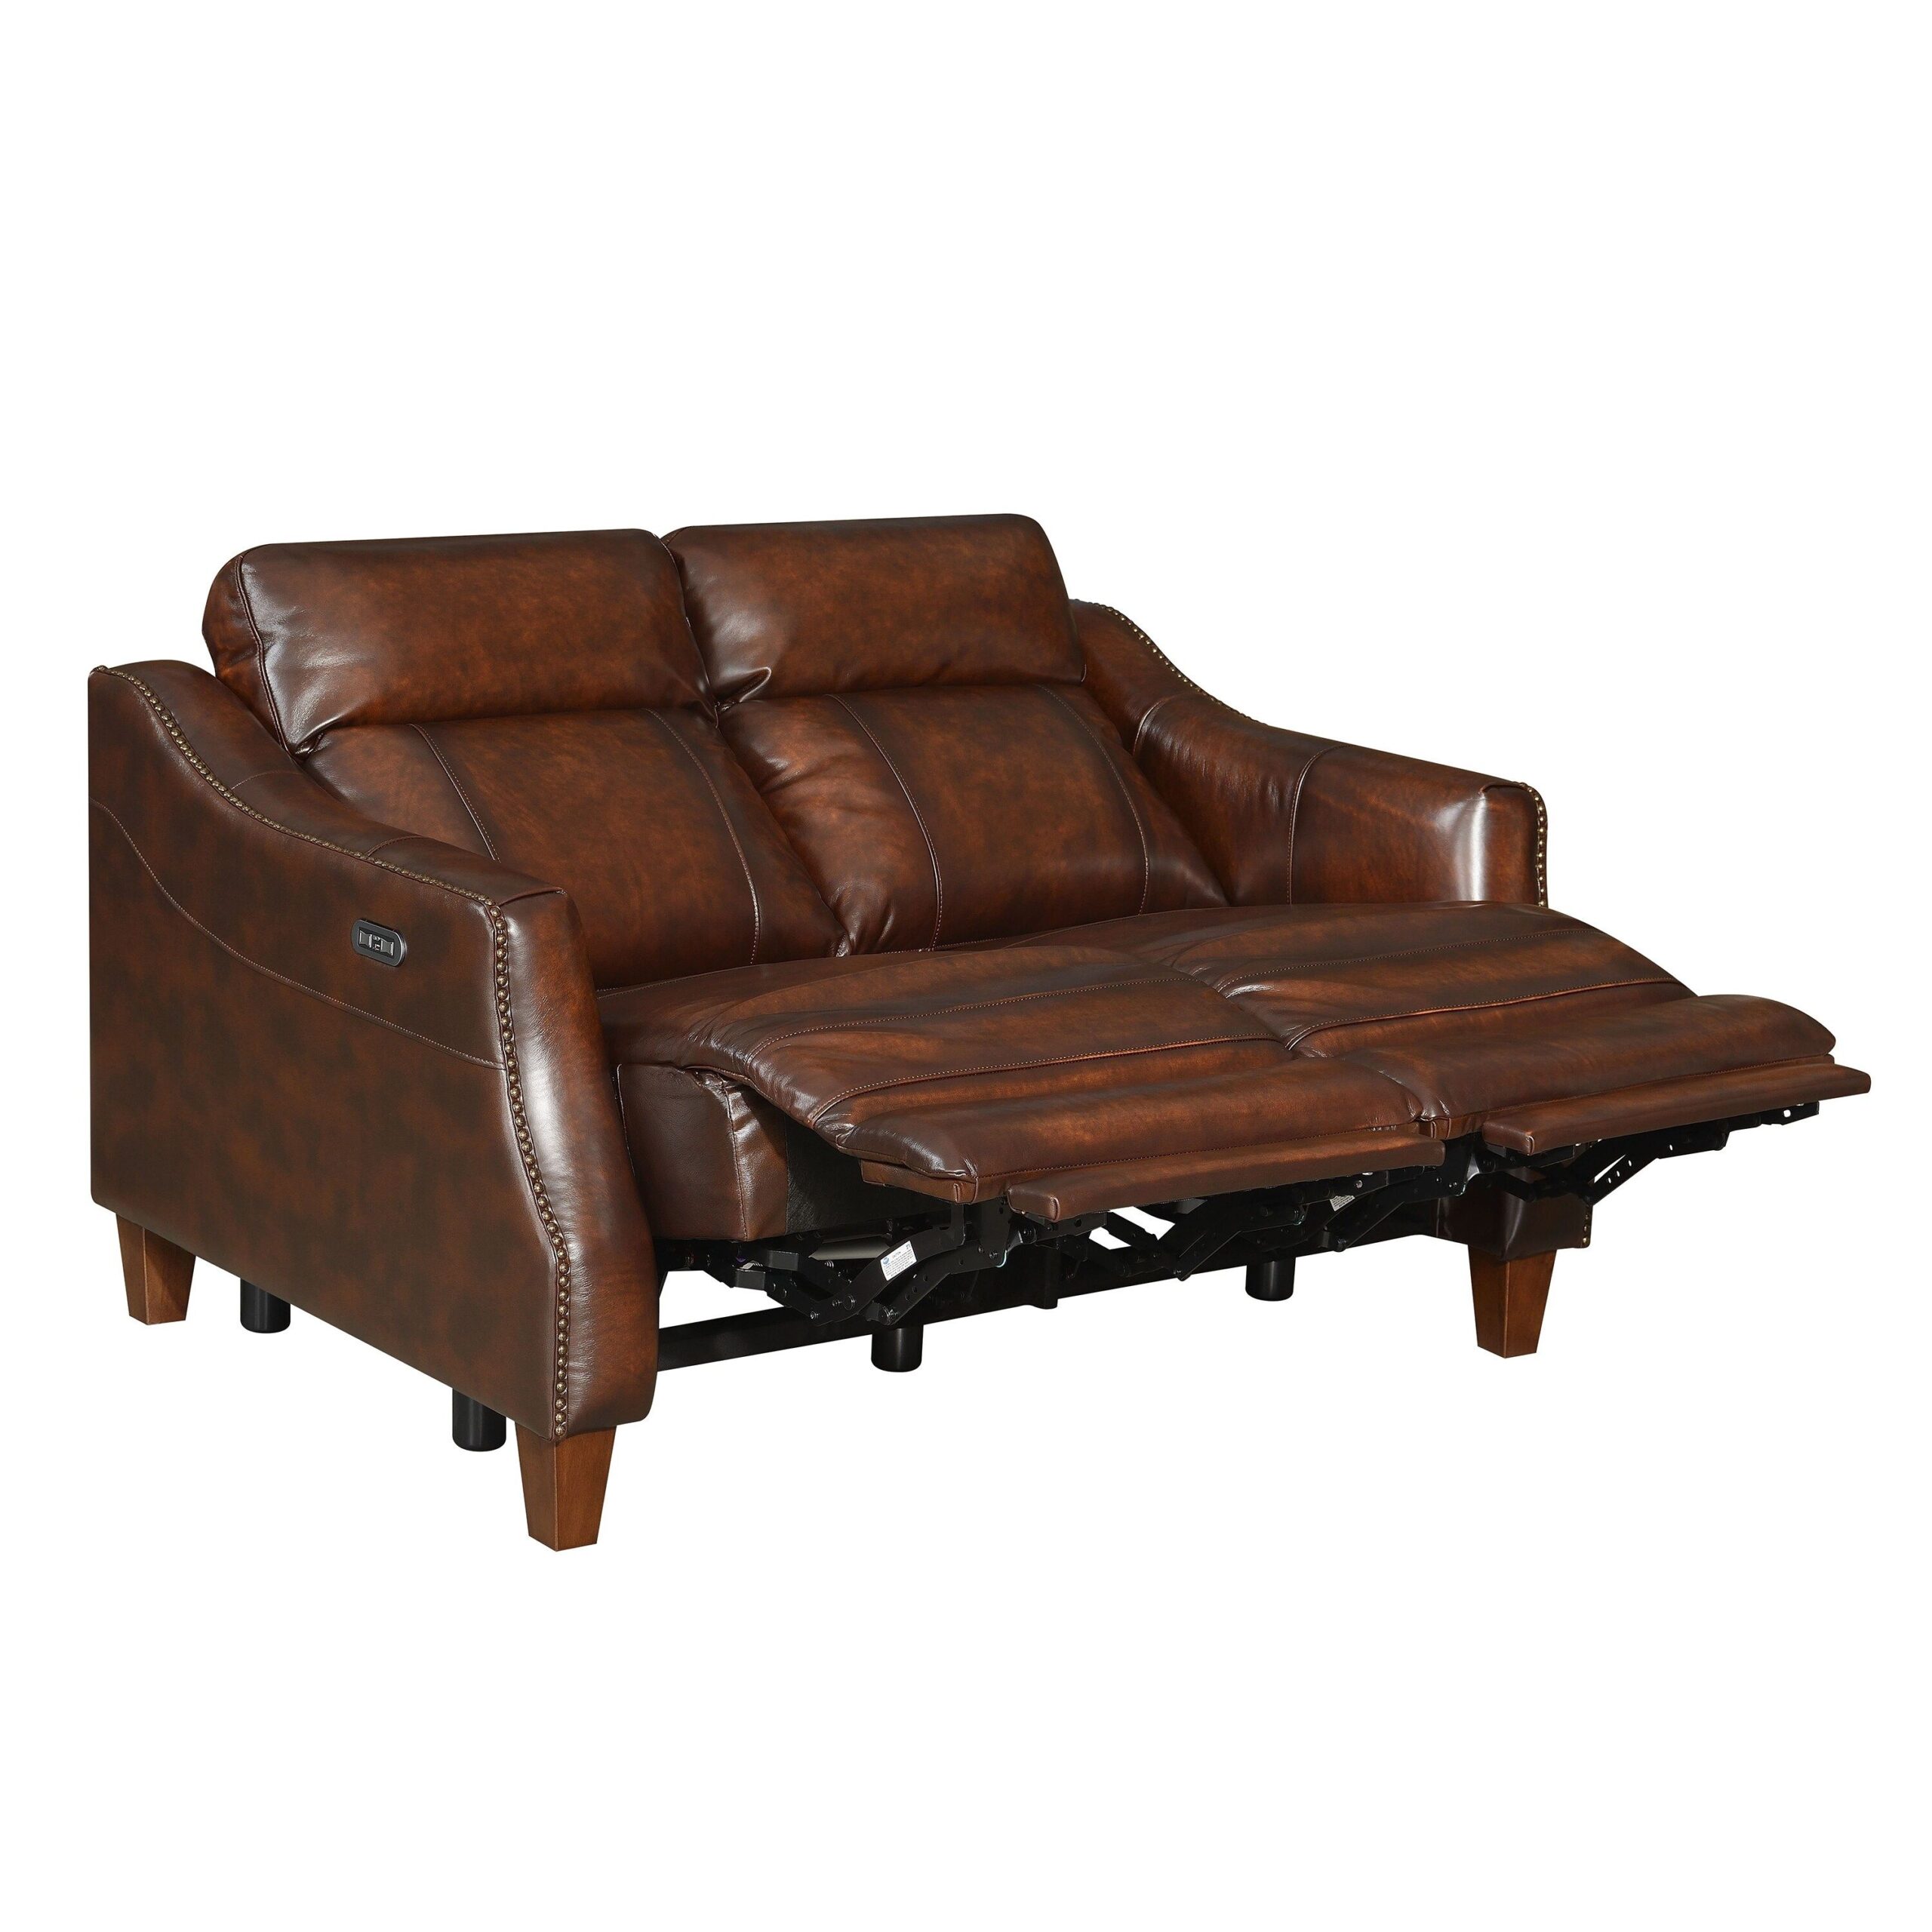 Loveseat Recliner Leather Ideas To Try